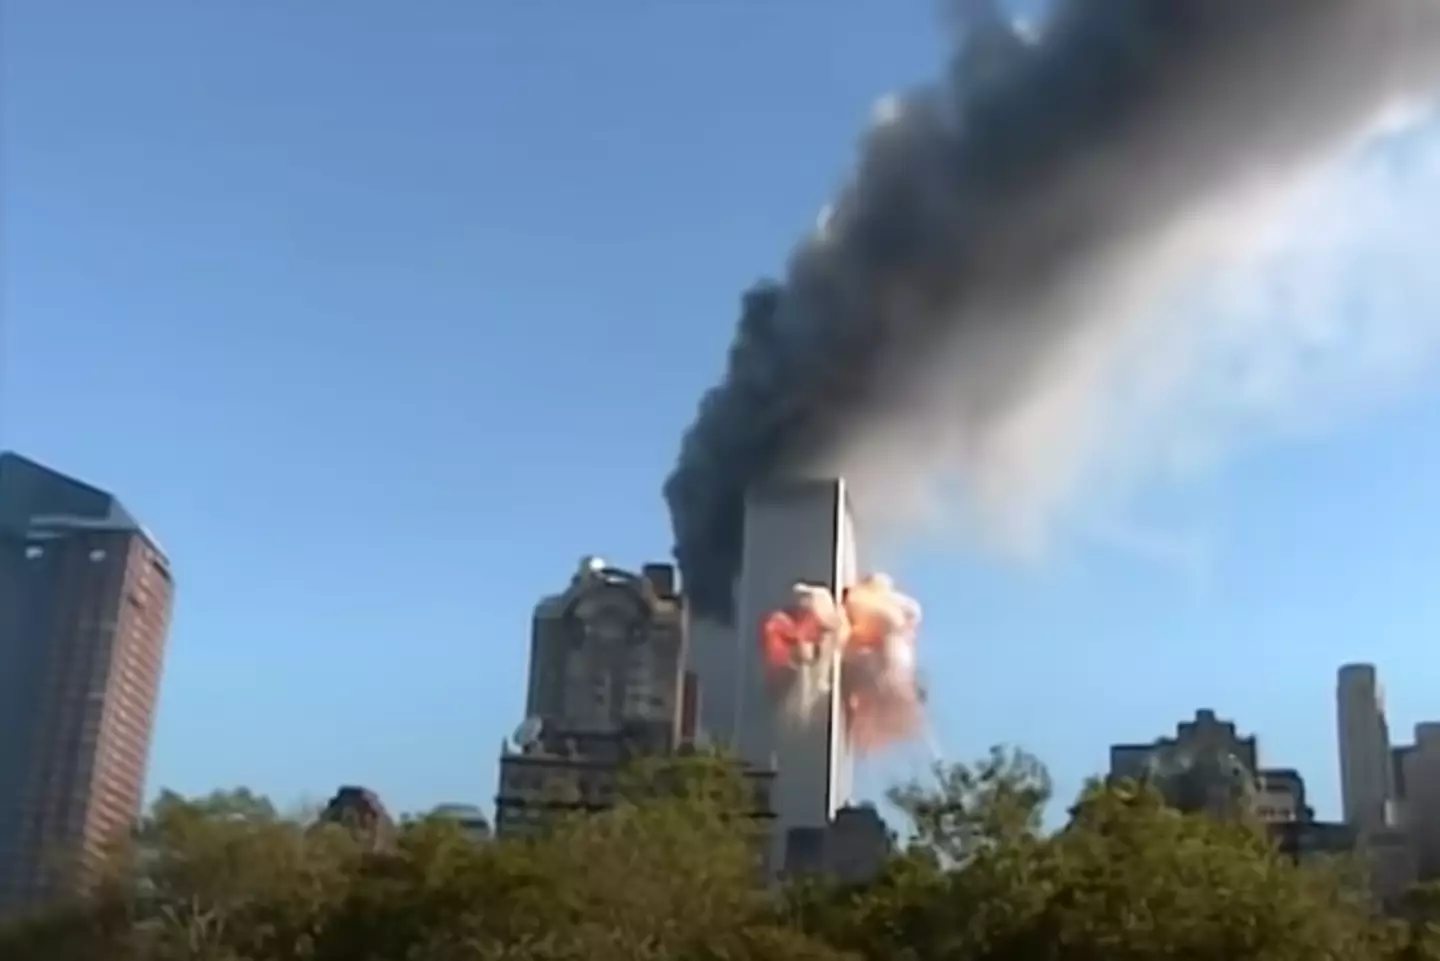 Terrifying footage shows the moment the second plane hit the World Trade Center from a new angle.